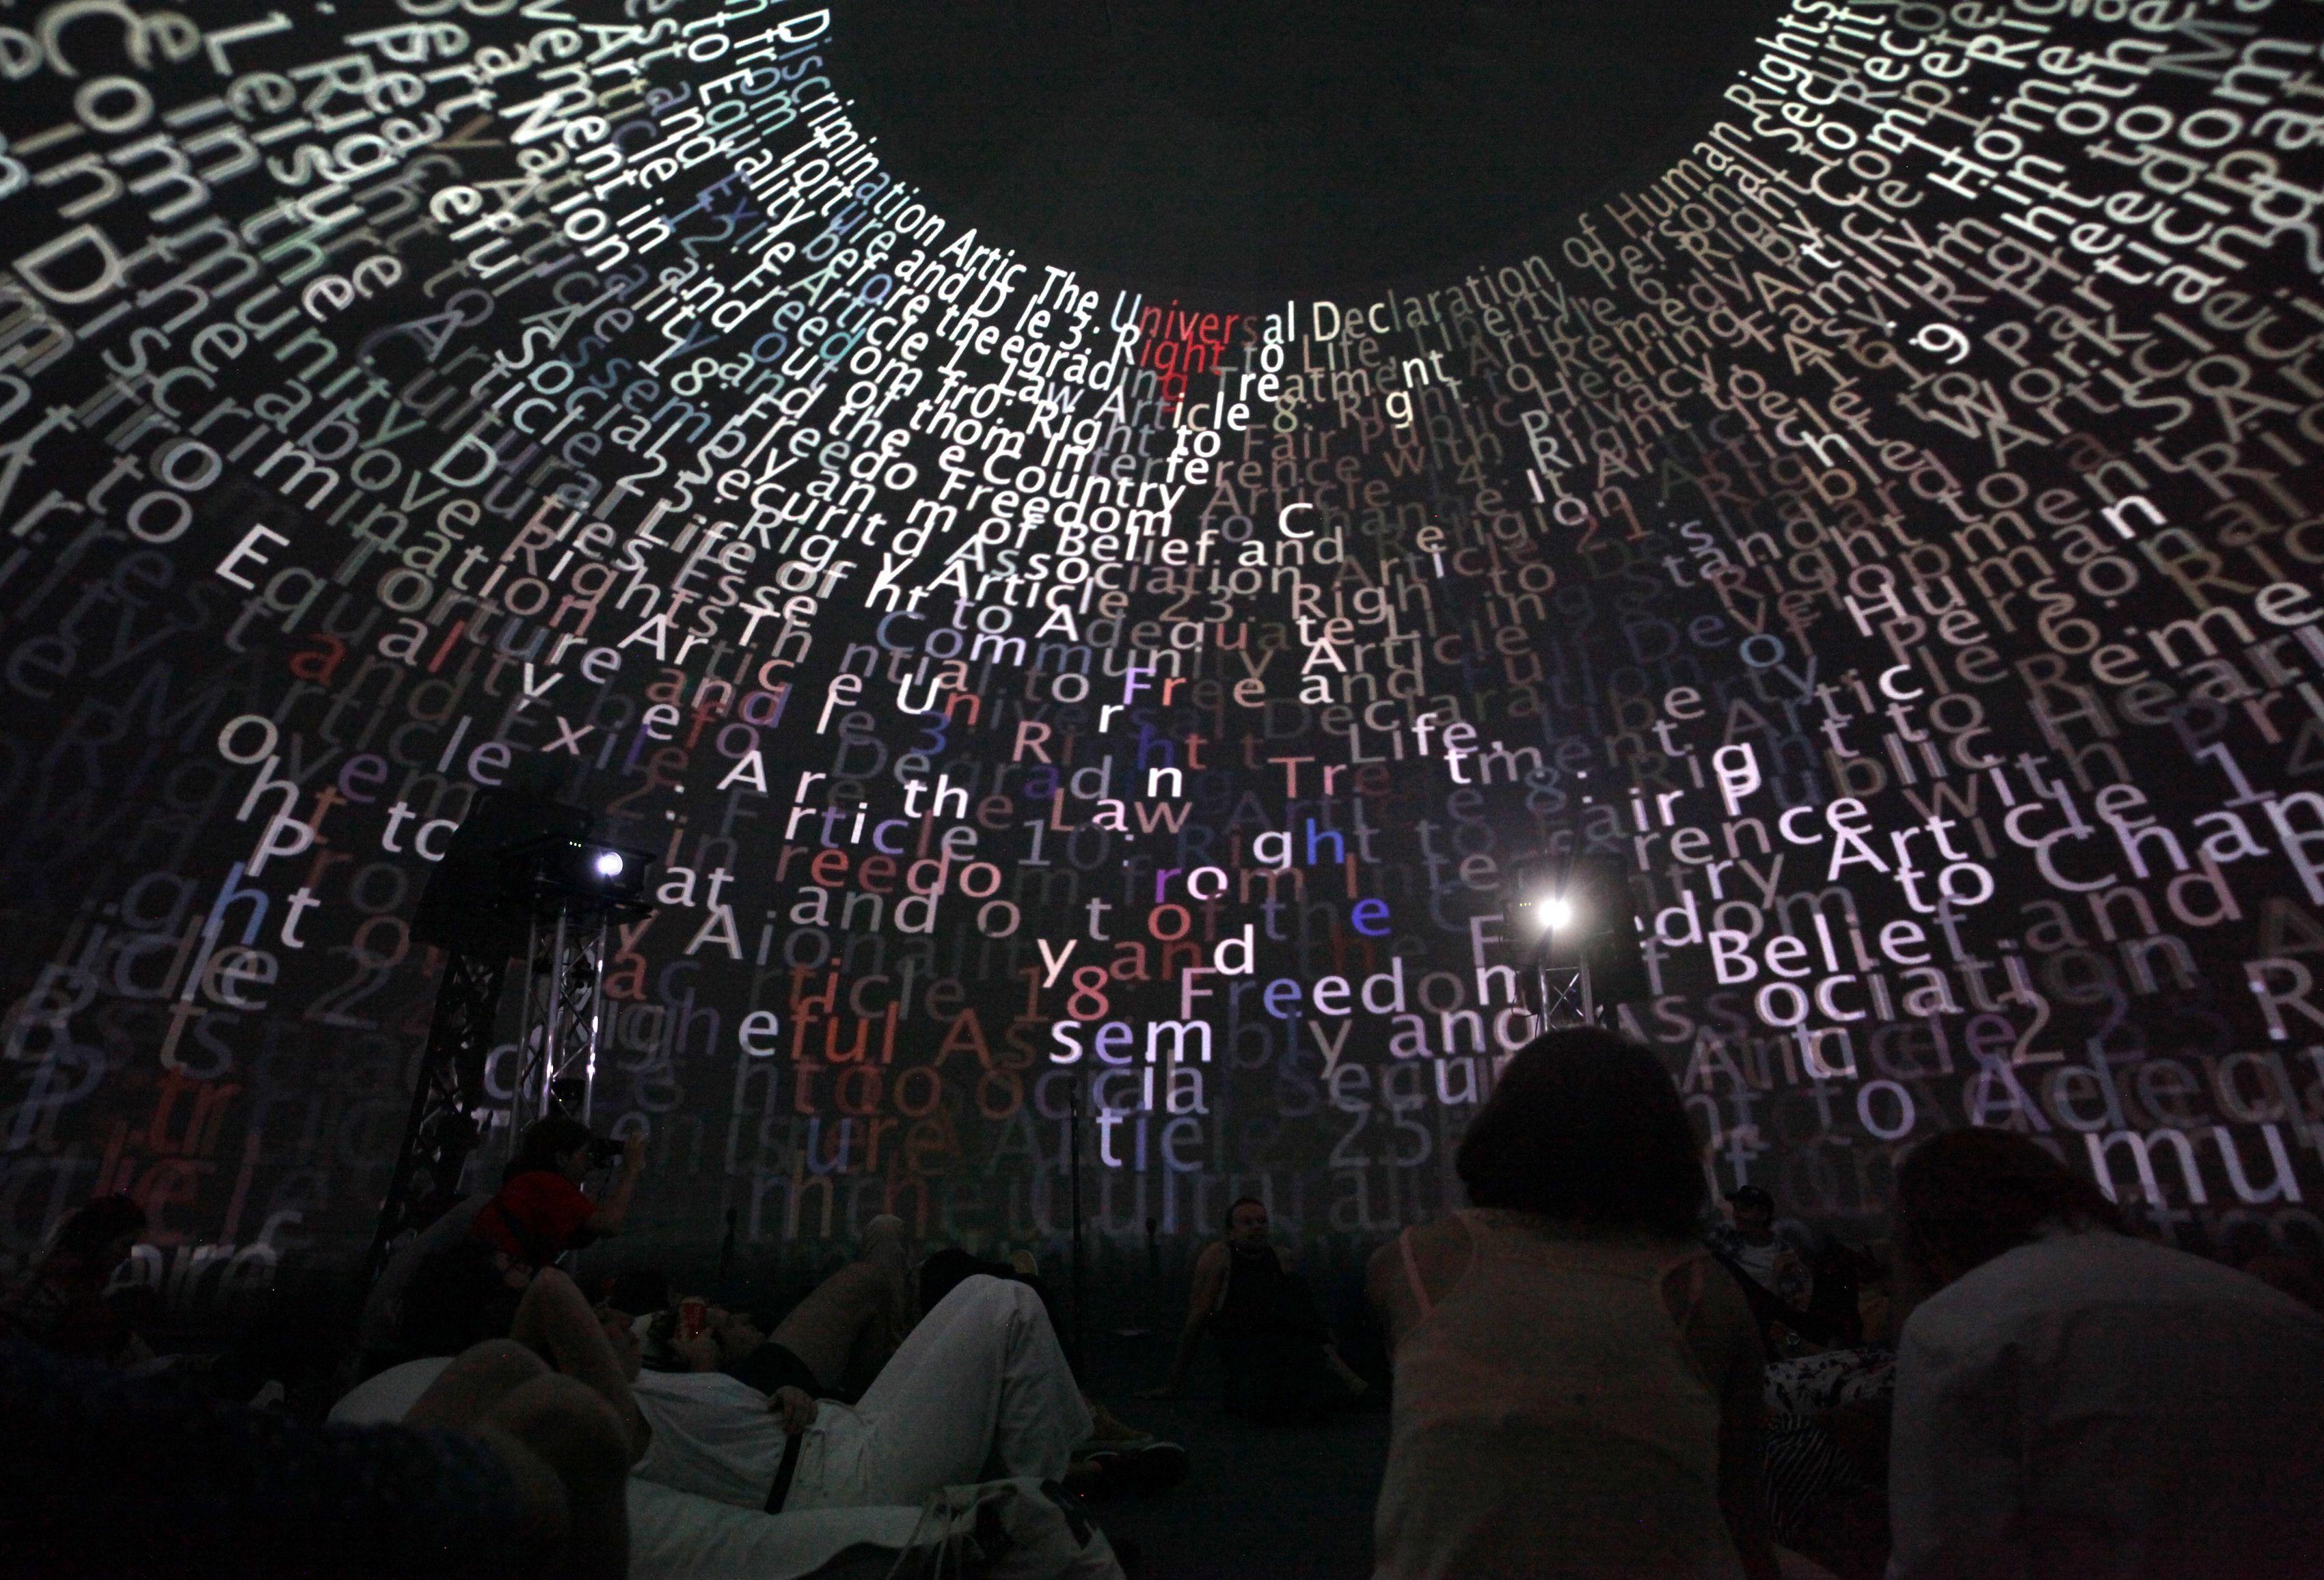 A mobile outdoor projection dome at the Angewandte Festival